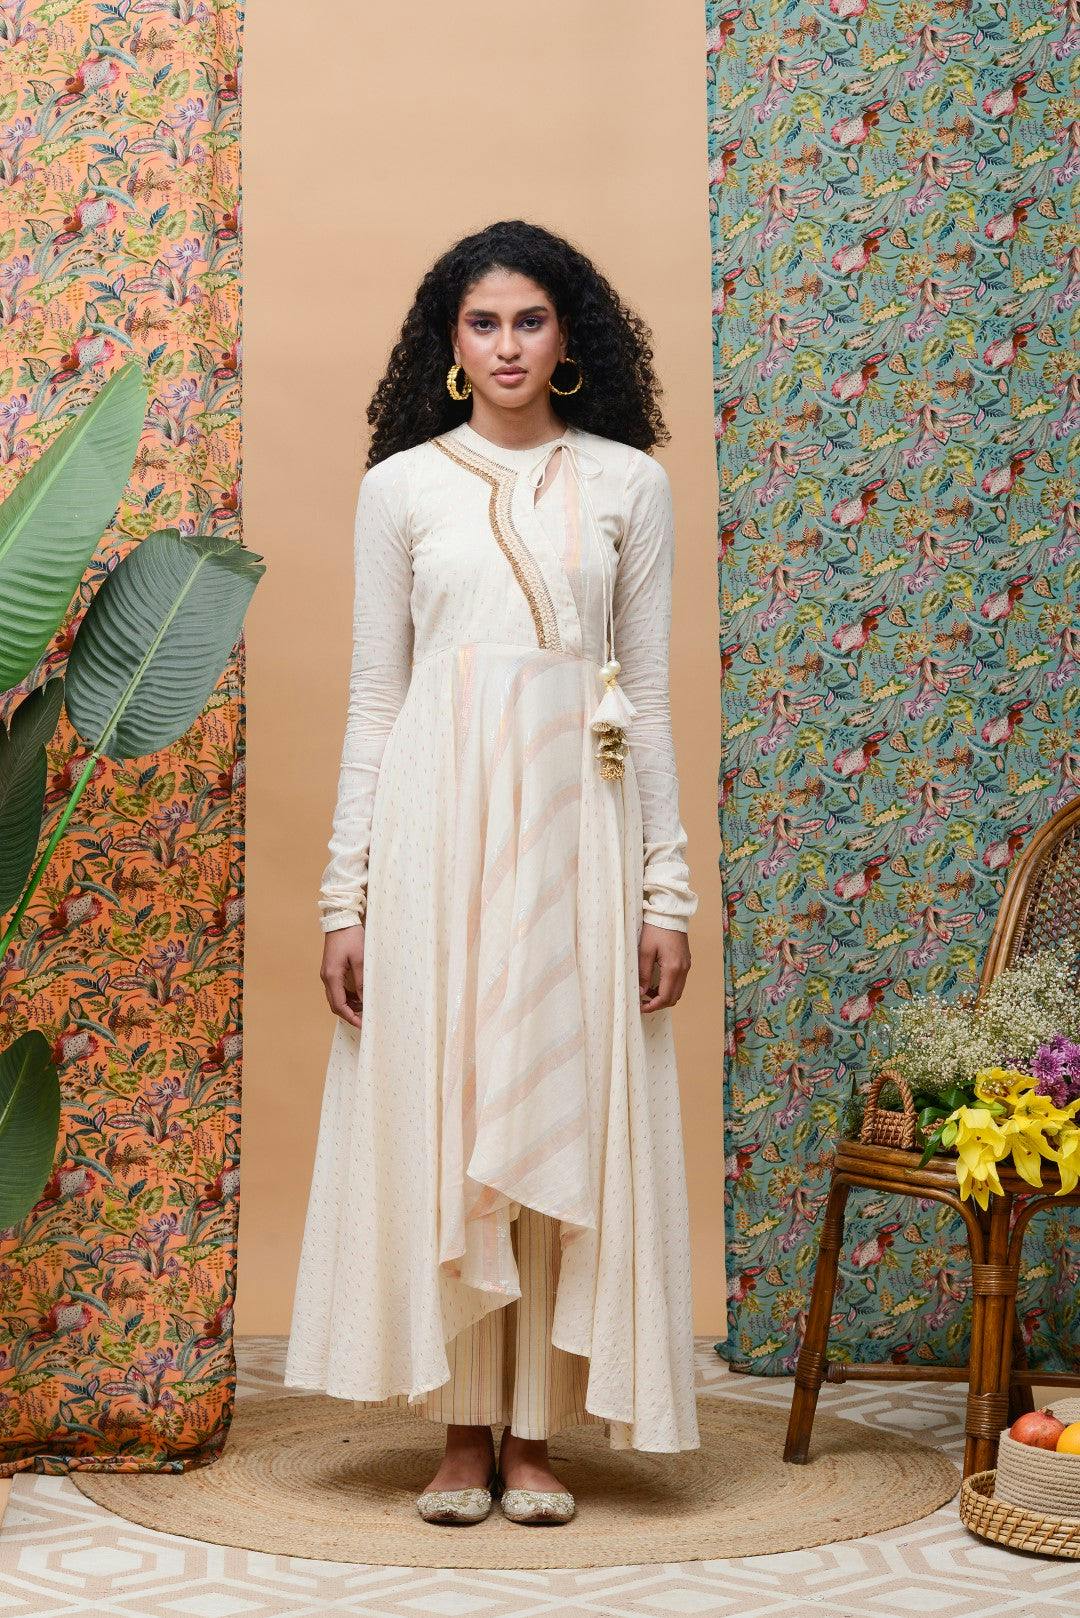 Hibiscus Anarkali, a product by Rishi and Vibhuti